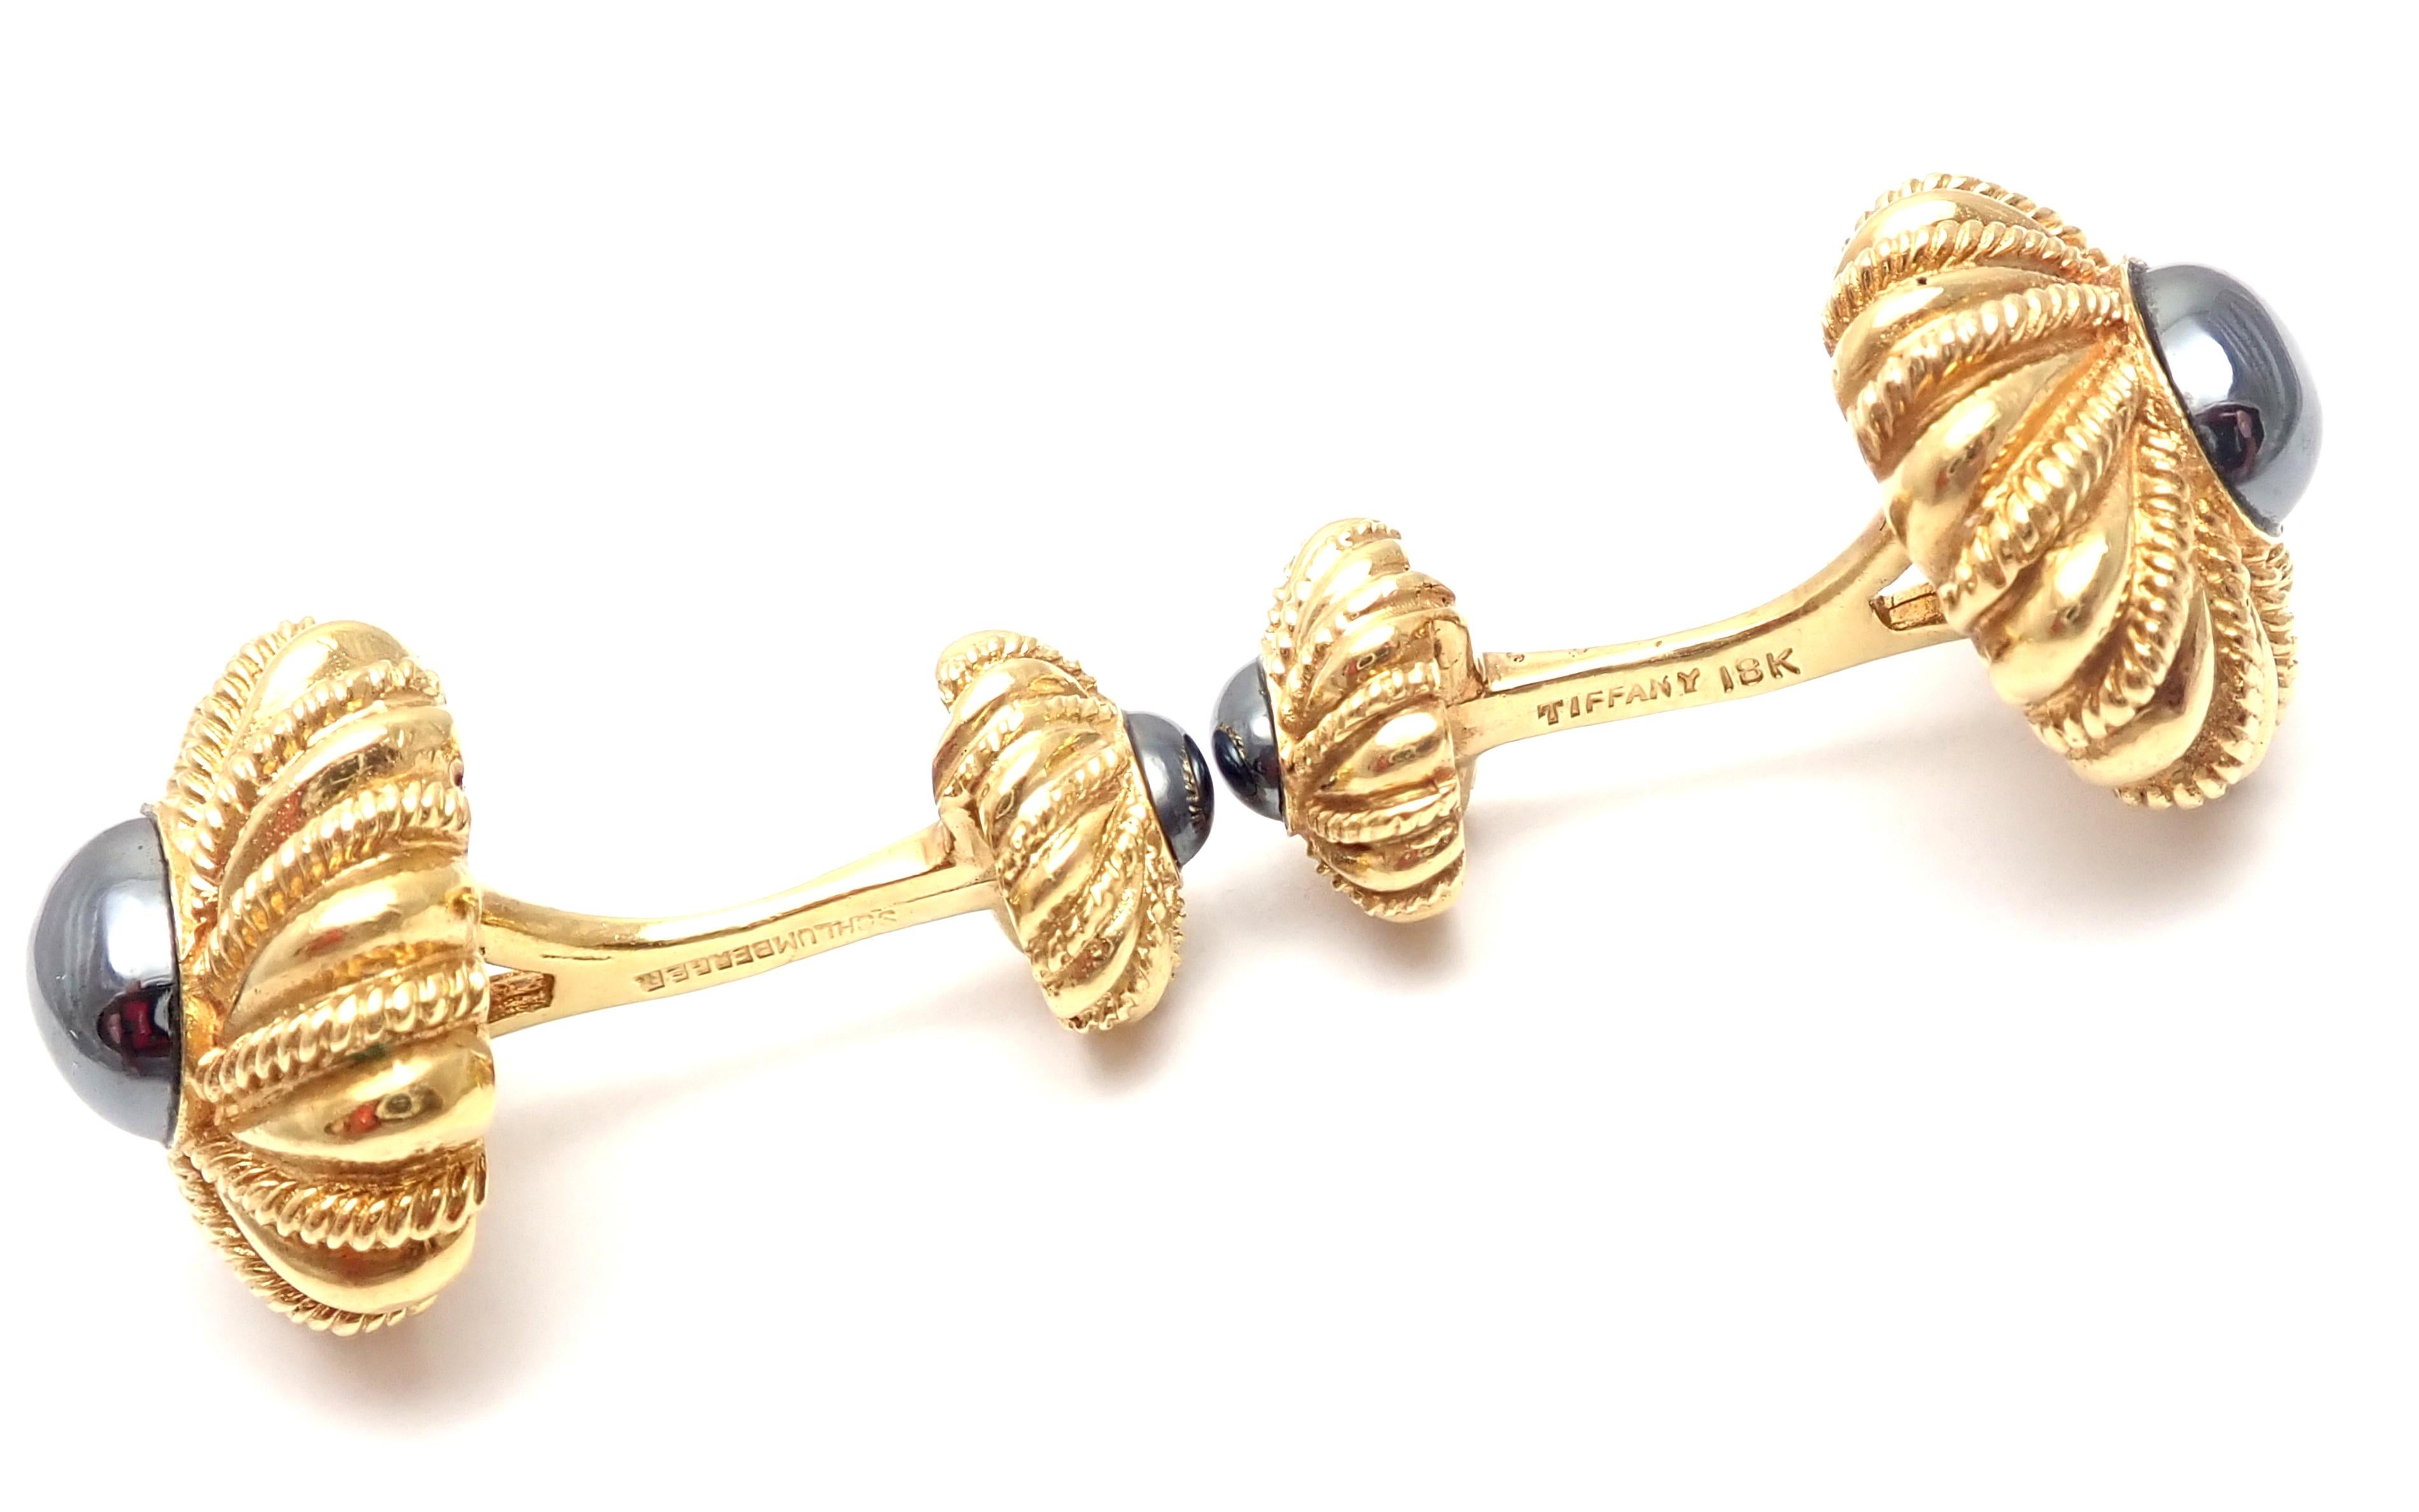 Tiffany & Co. Jean Schlumberger Hematite Yellow Gold Cufflinks In Excellent Condition For Sale In Holland, PA